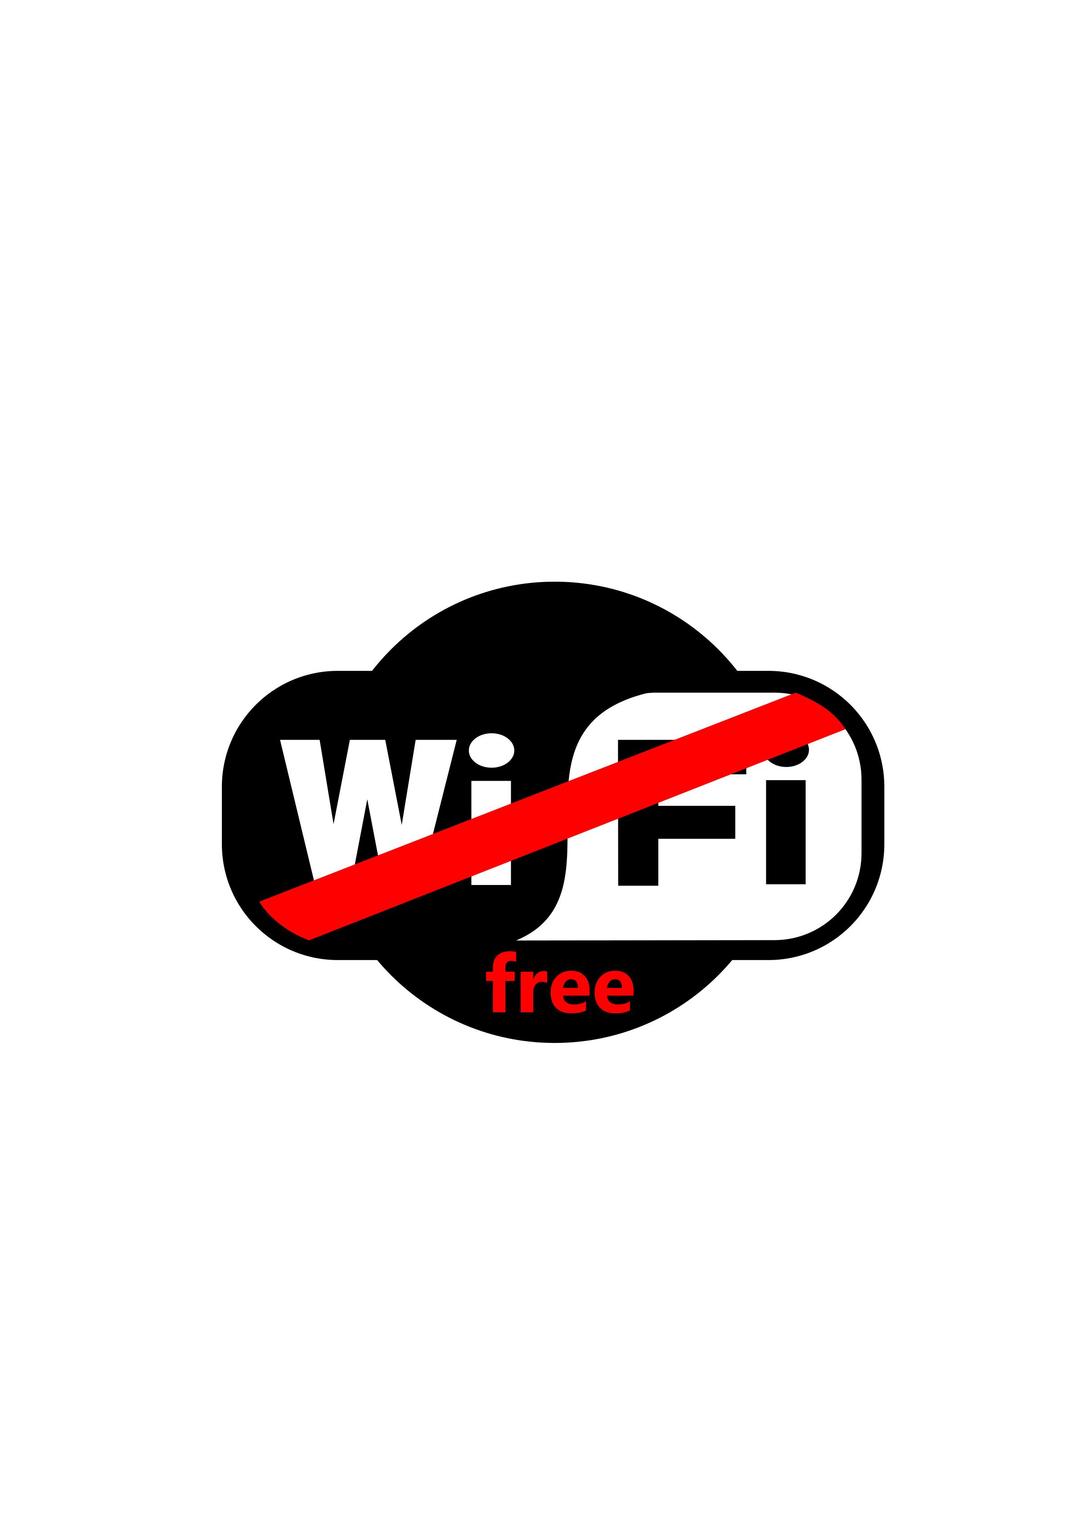 wifi-free png transparent